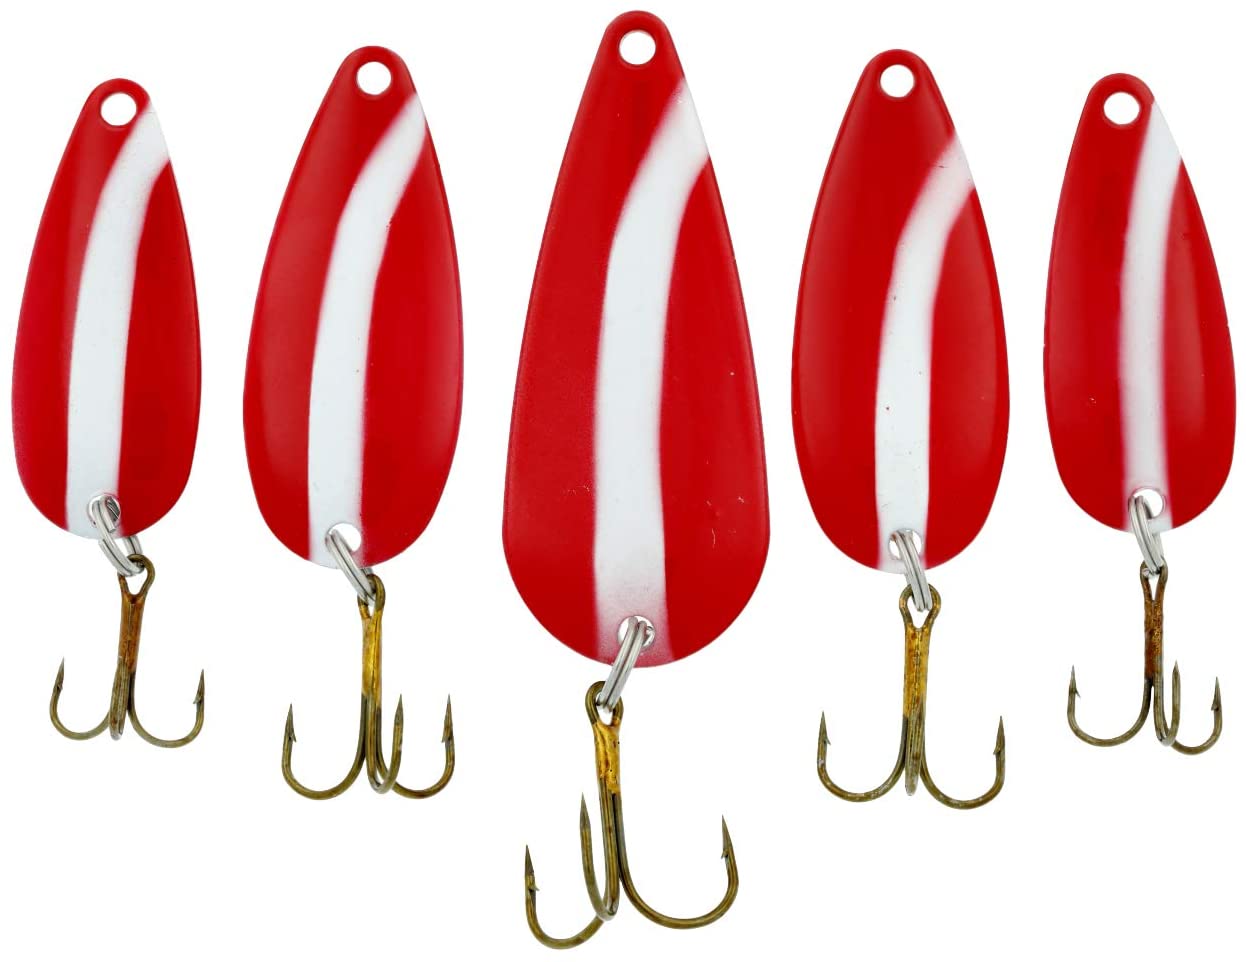 Doomsday Spoons – Red & White, 5 Pack